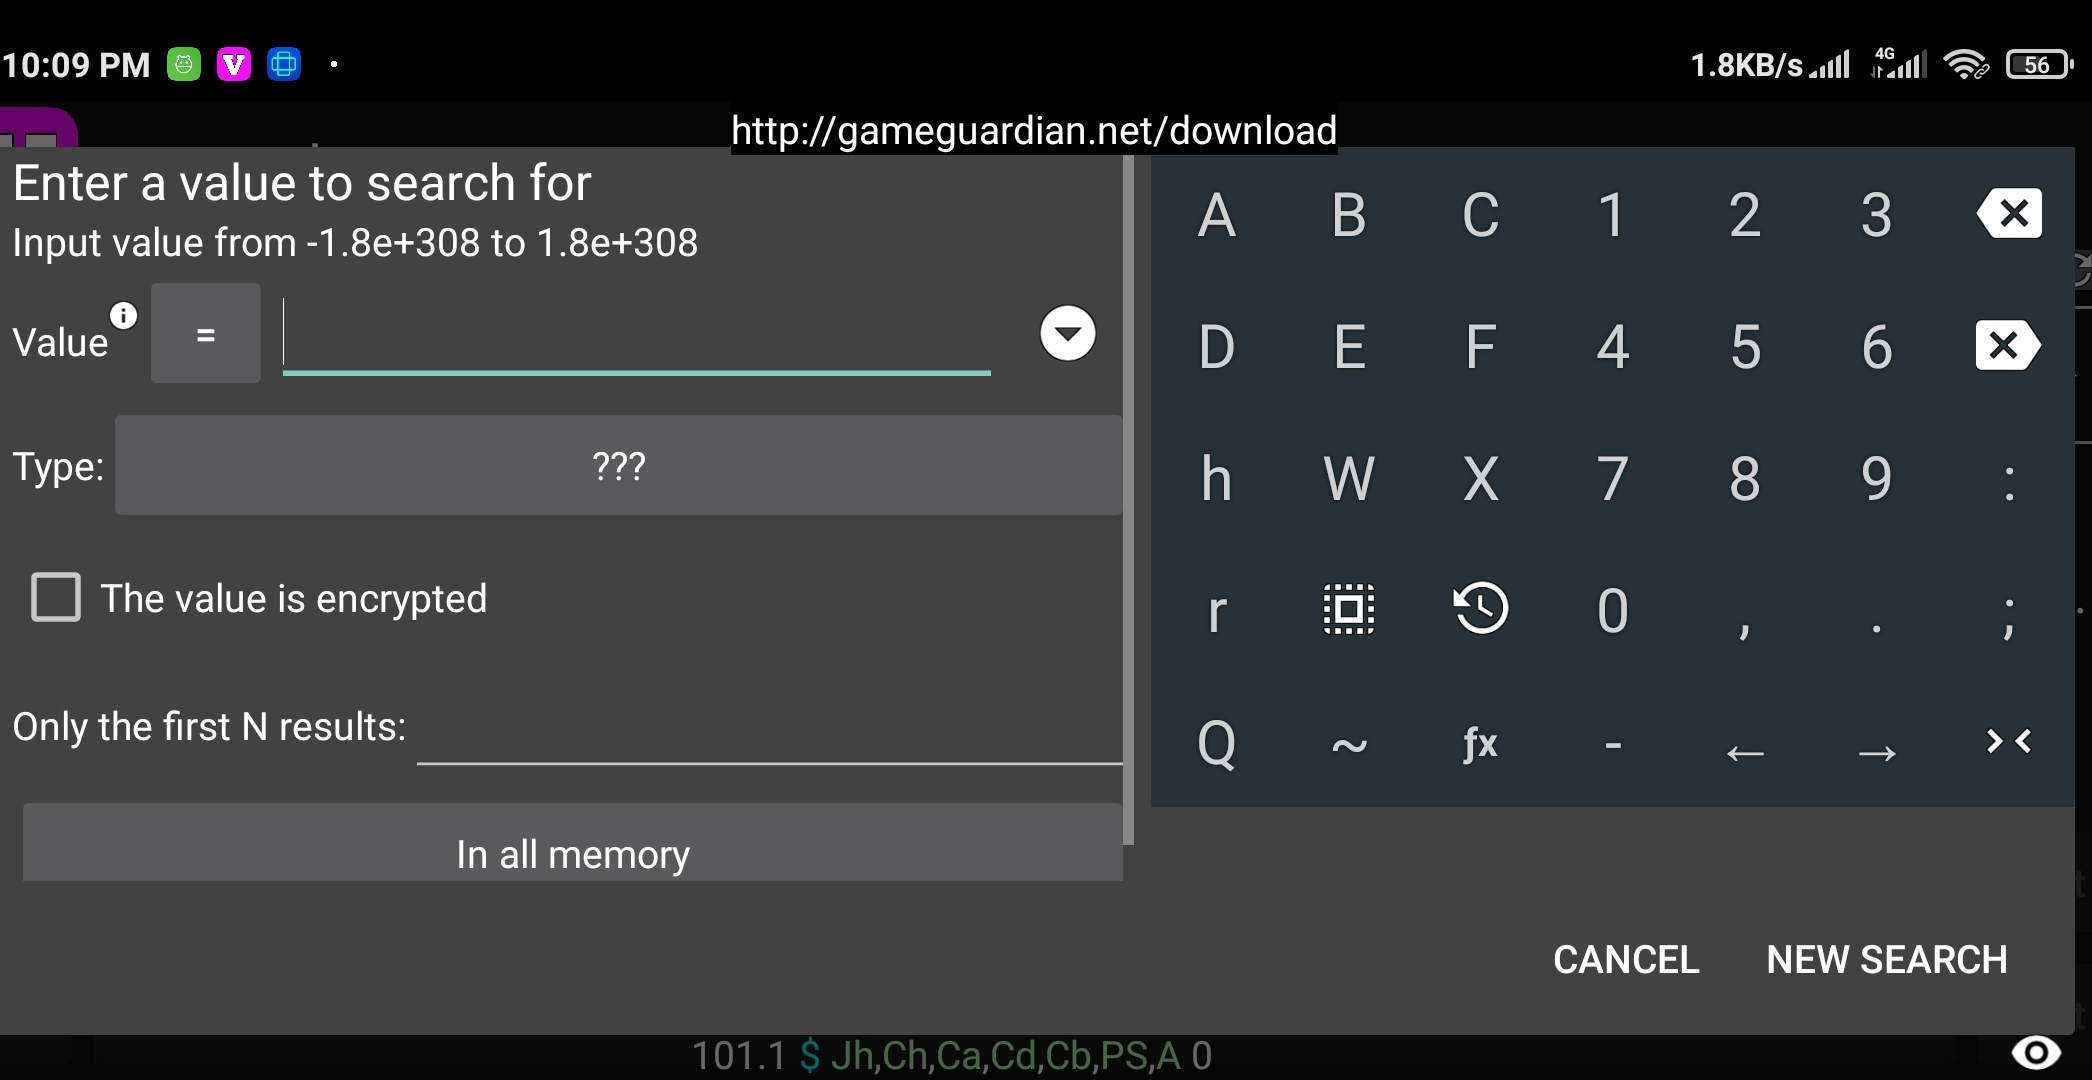 APP RECOMMENDATION][UPDATED] Game Guardian 6.0.0 -> Cheat Engine for Android!